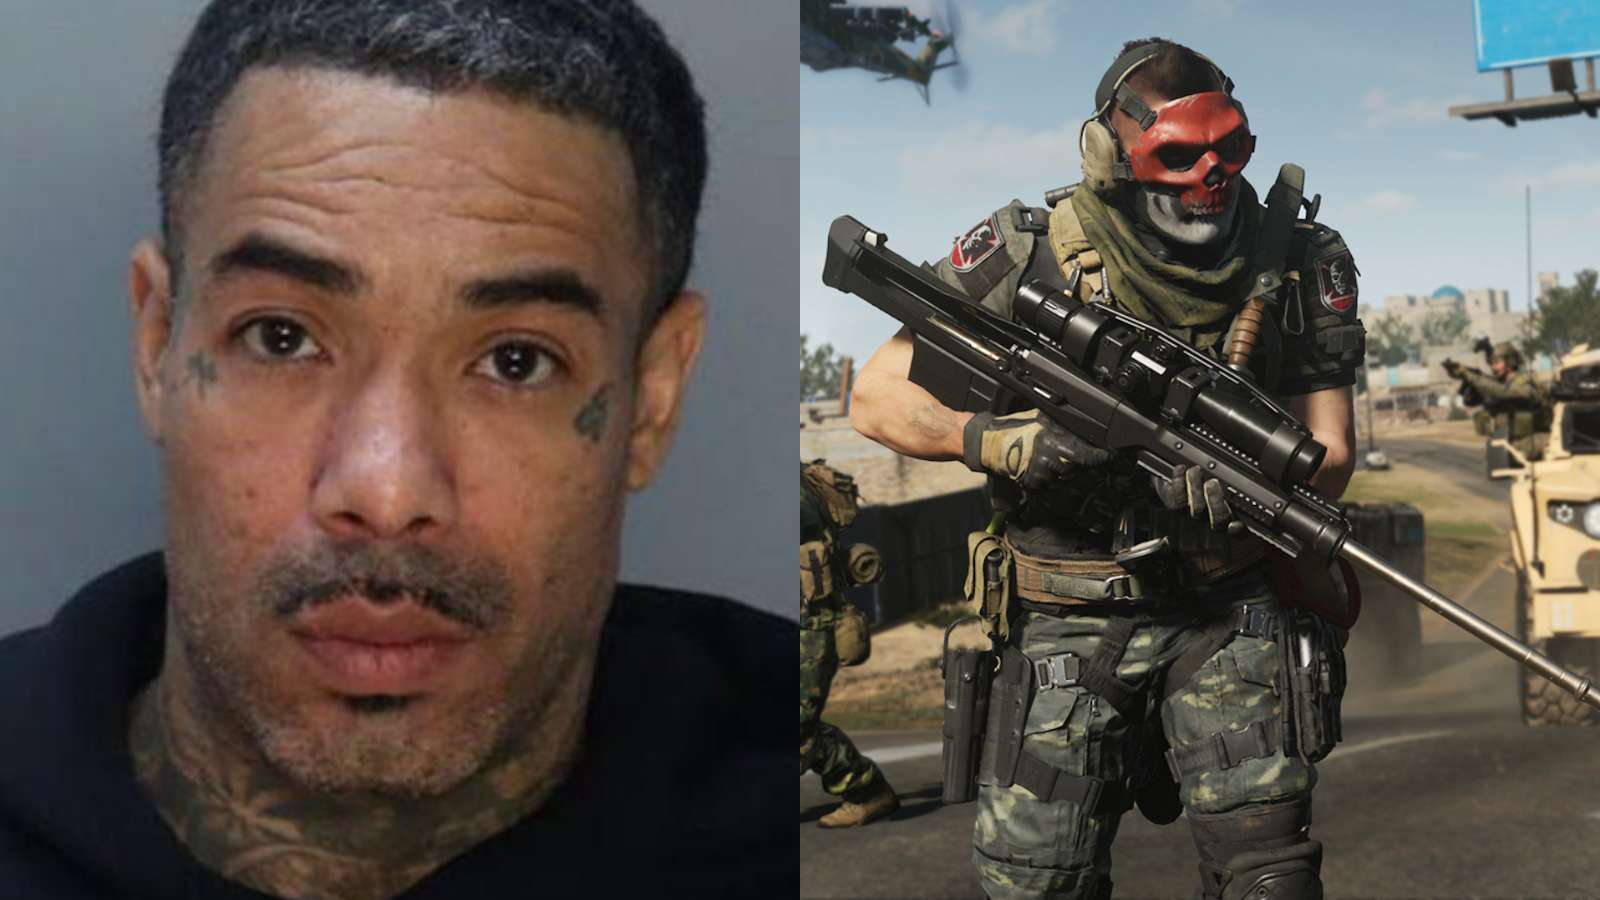 gunplay arrested after fighting with wife over call of duty